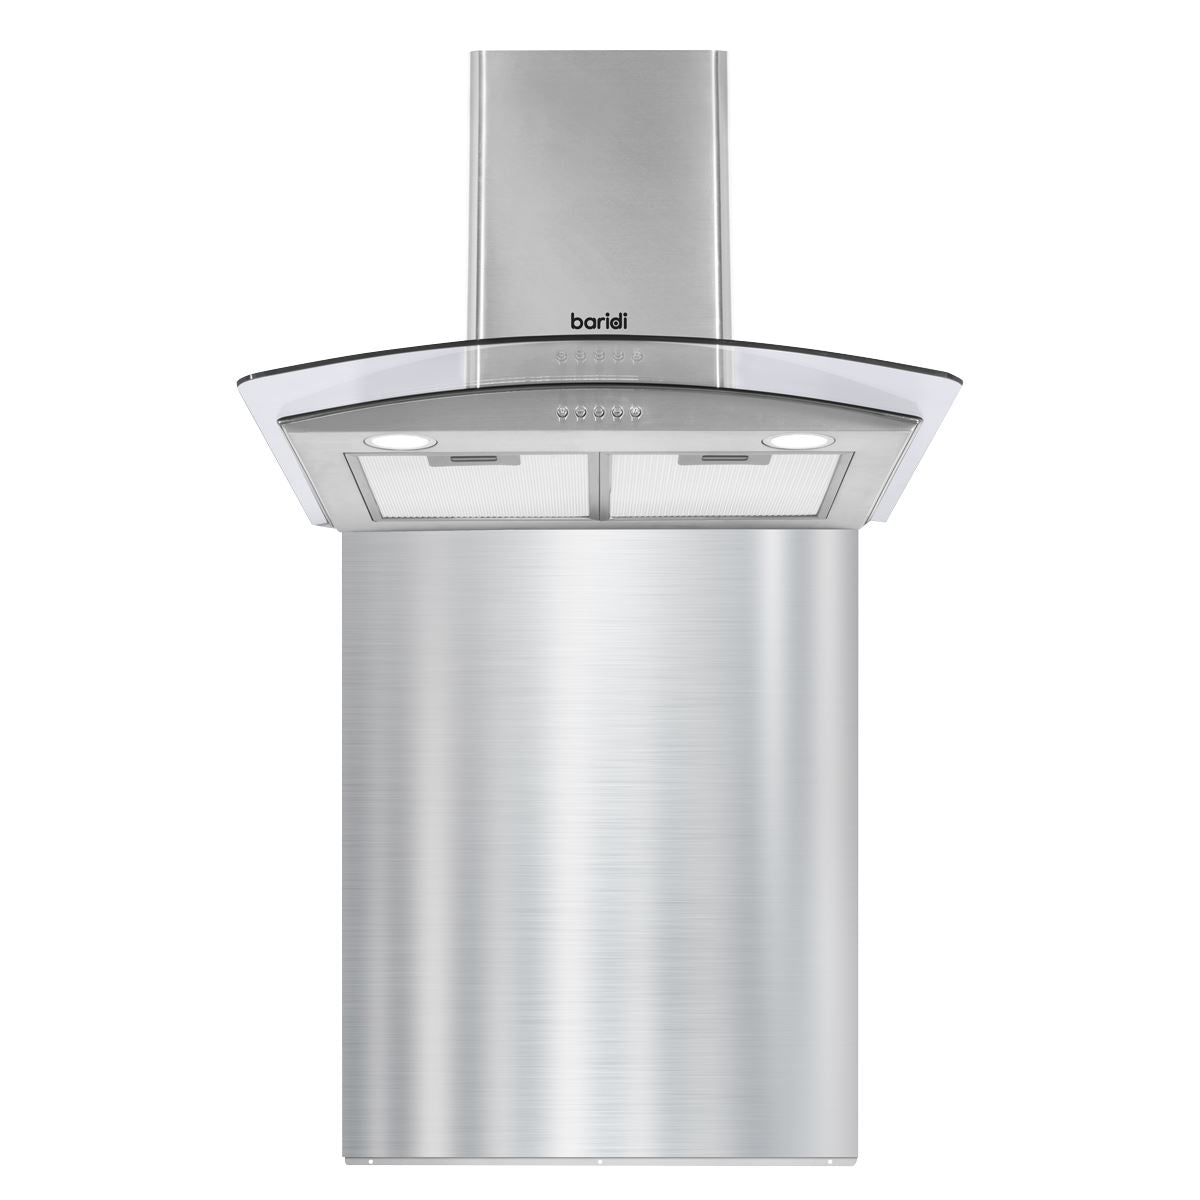 Baridi 60cm Curved Glass Cooker Hood with Carbon Filters, LED Lights & Splashback, Stainless Steel